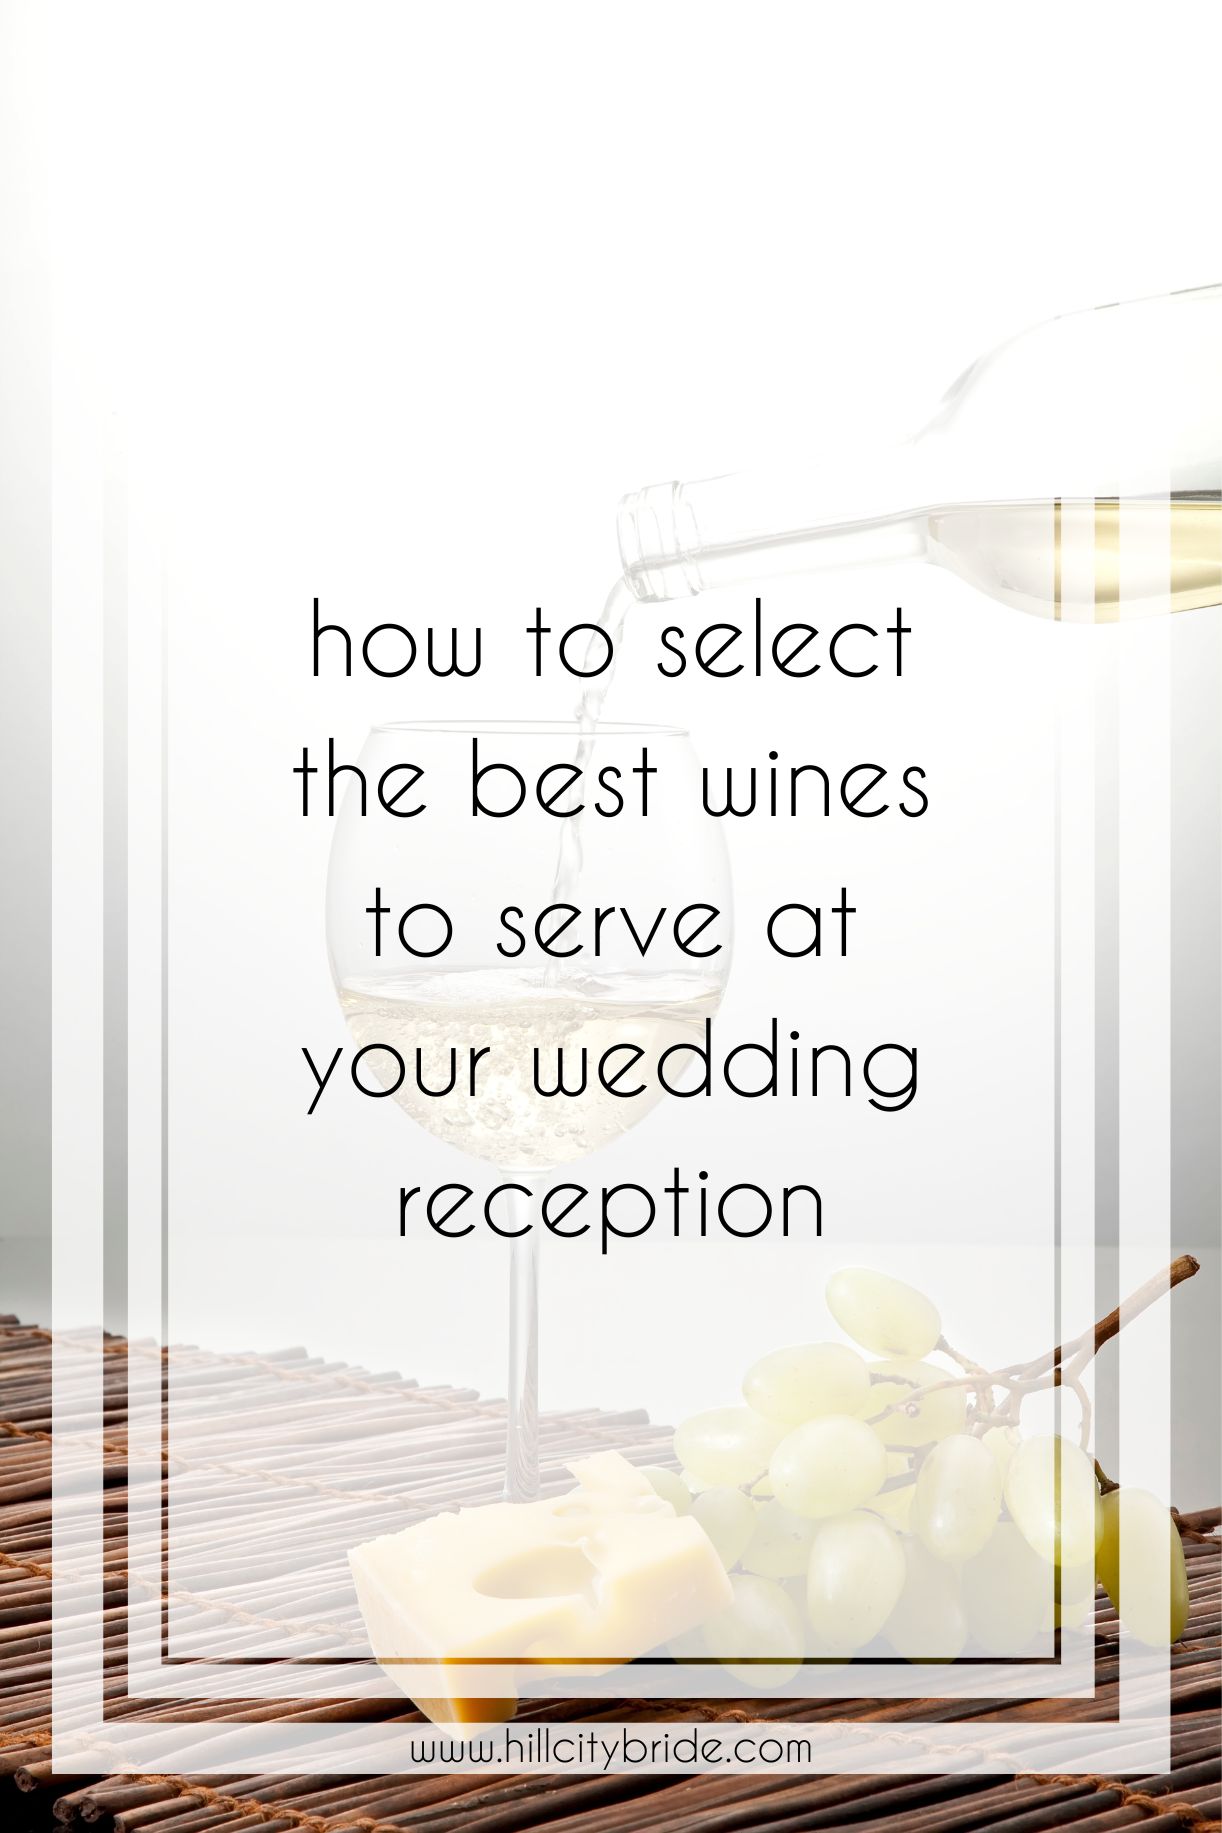 How to Find the Best Wines to Serve at Your Wedding Reception